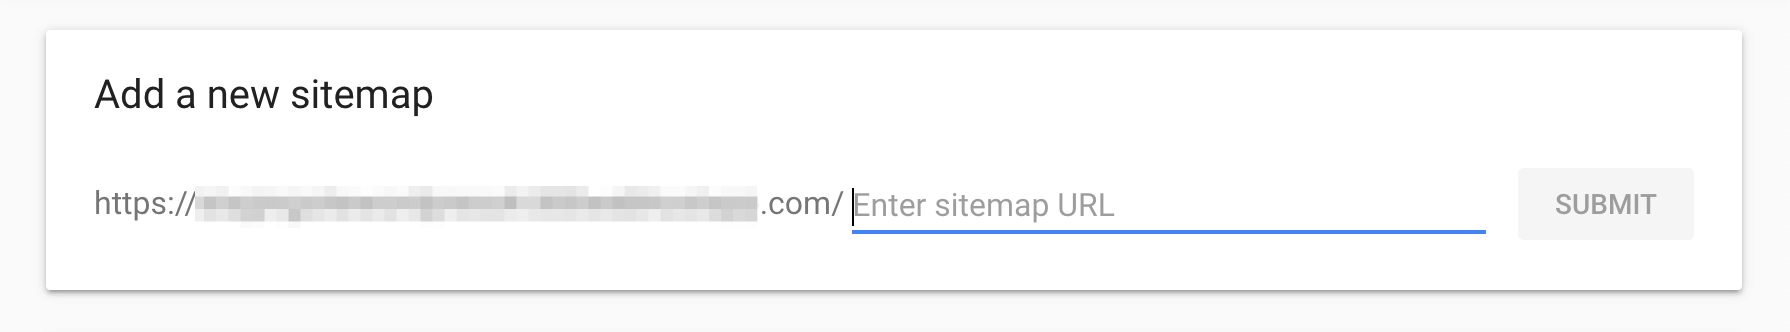 Submitting a sitemap in Search Console.